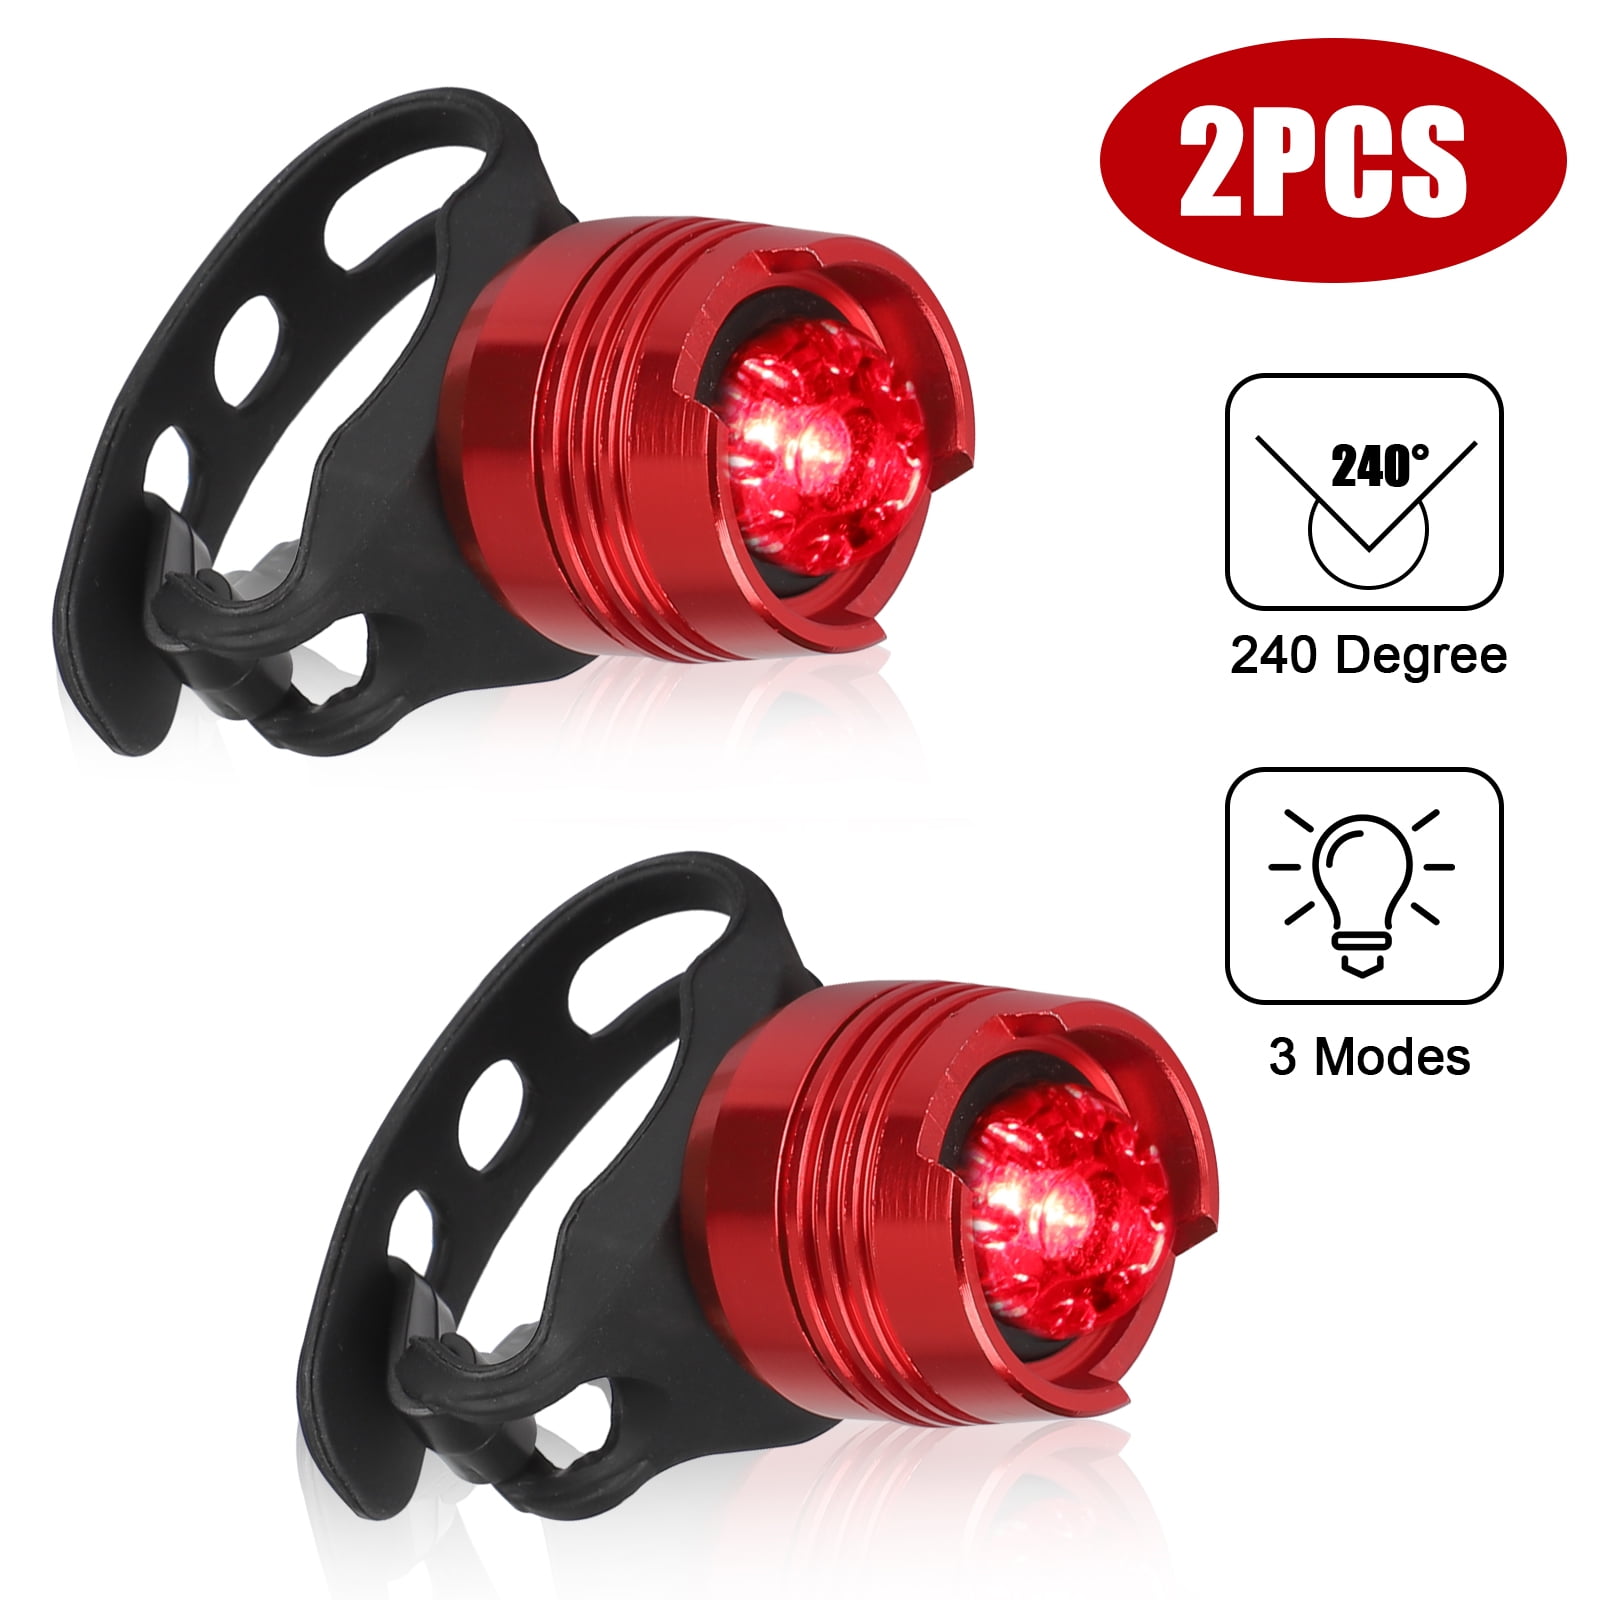 WonVon Bike Tail Light Turn Signals With Wireless Bicycle Taillight Warning Light Cycling Taillight For Bicycle